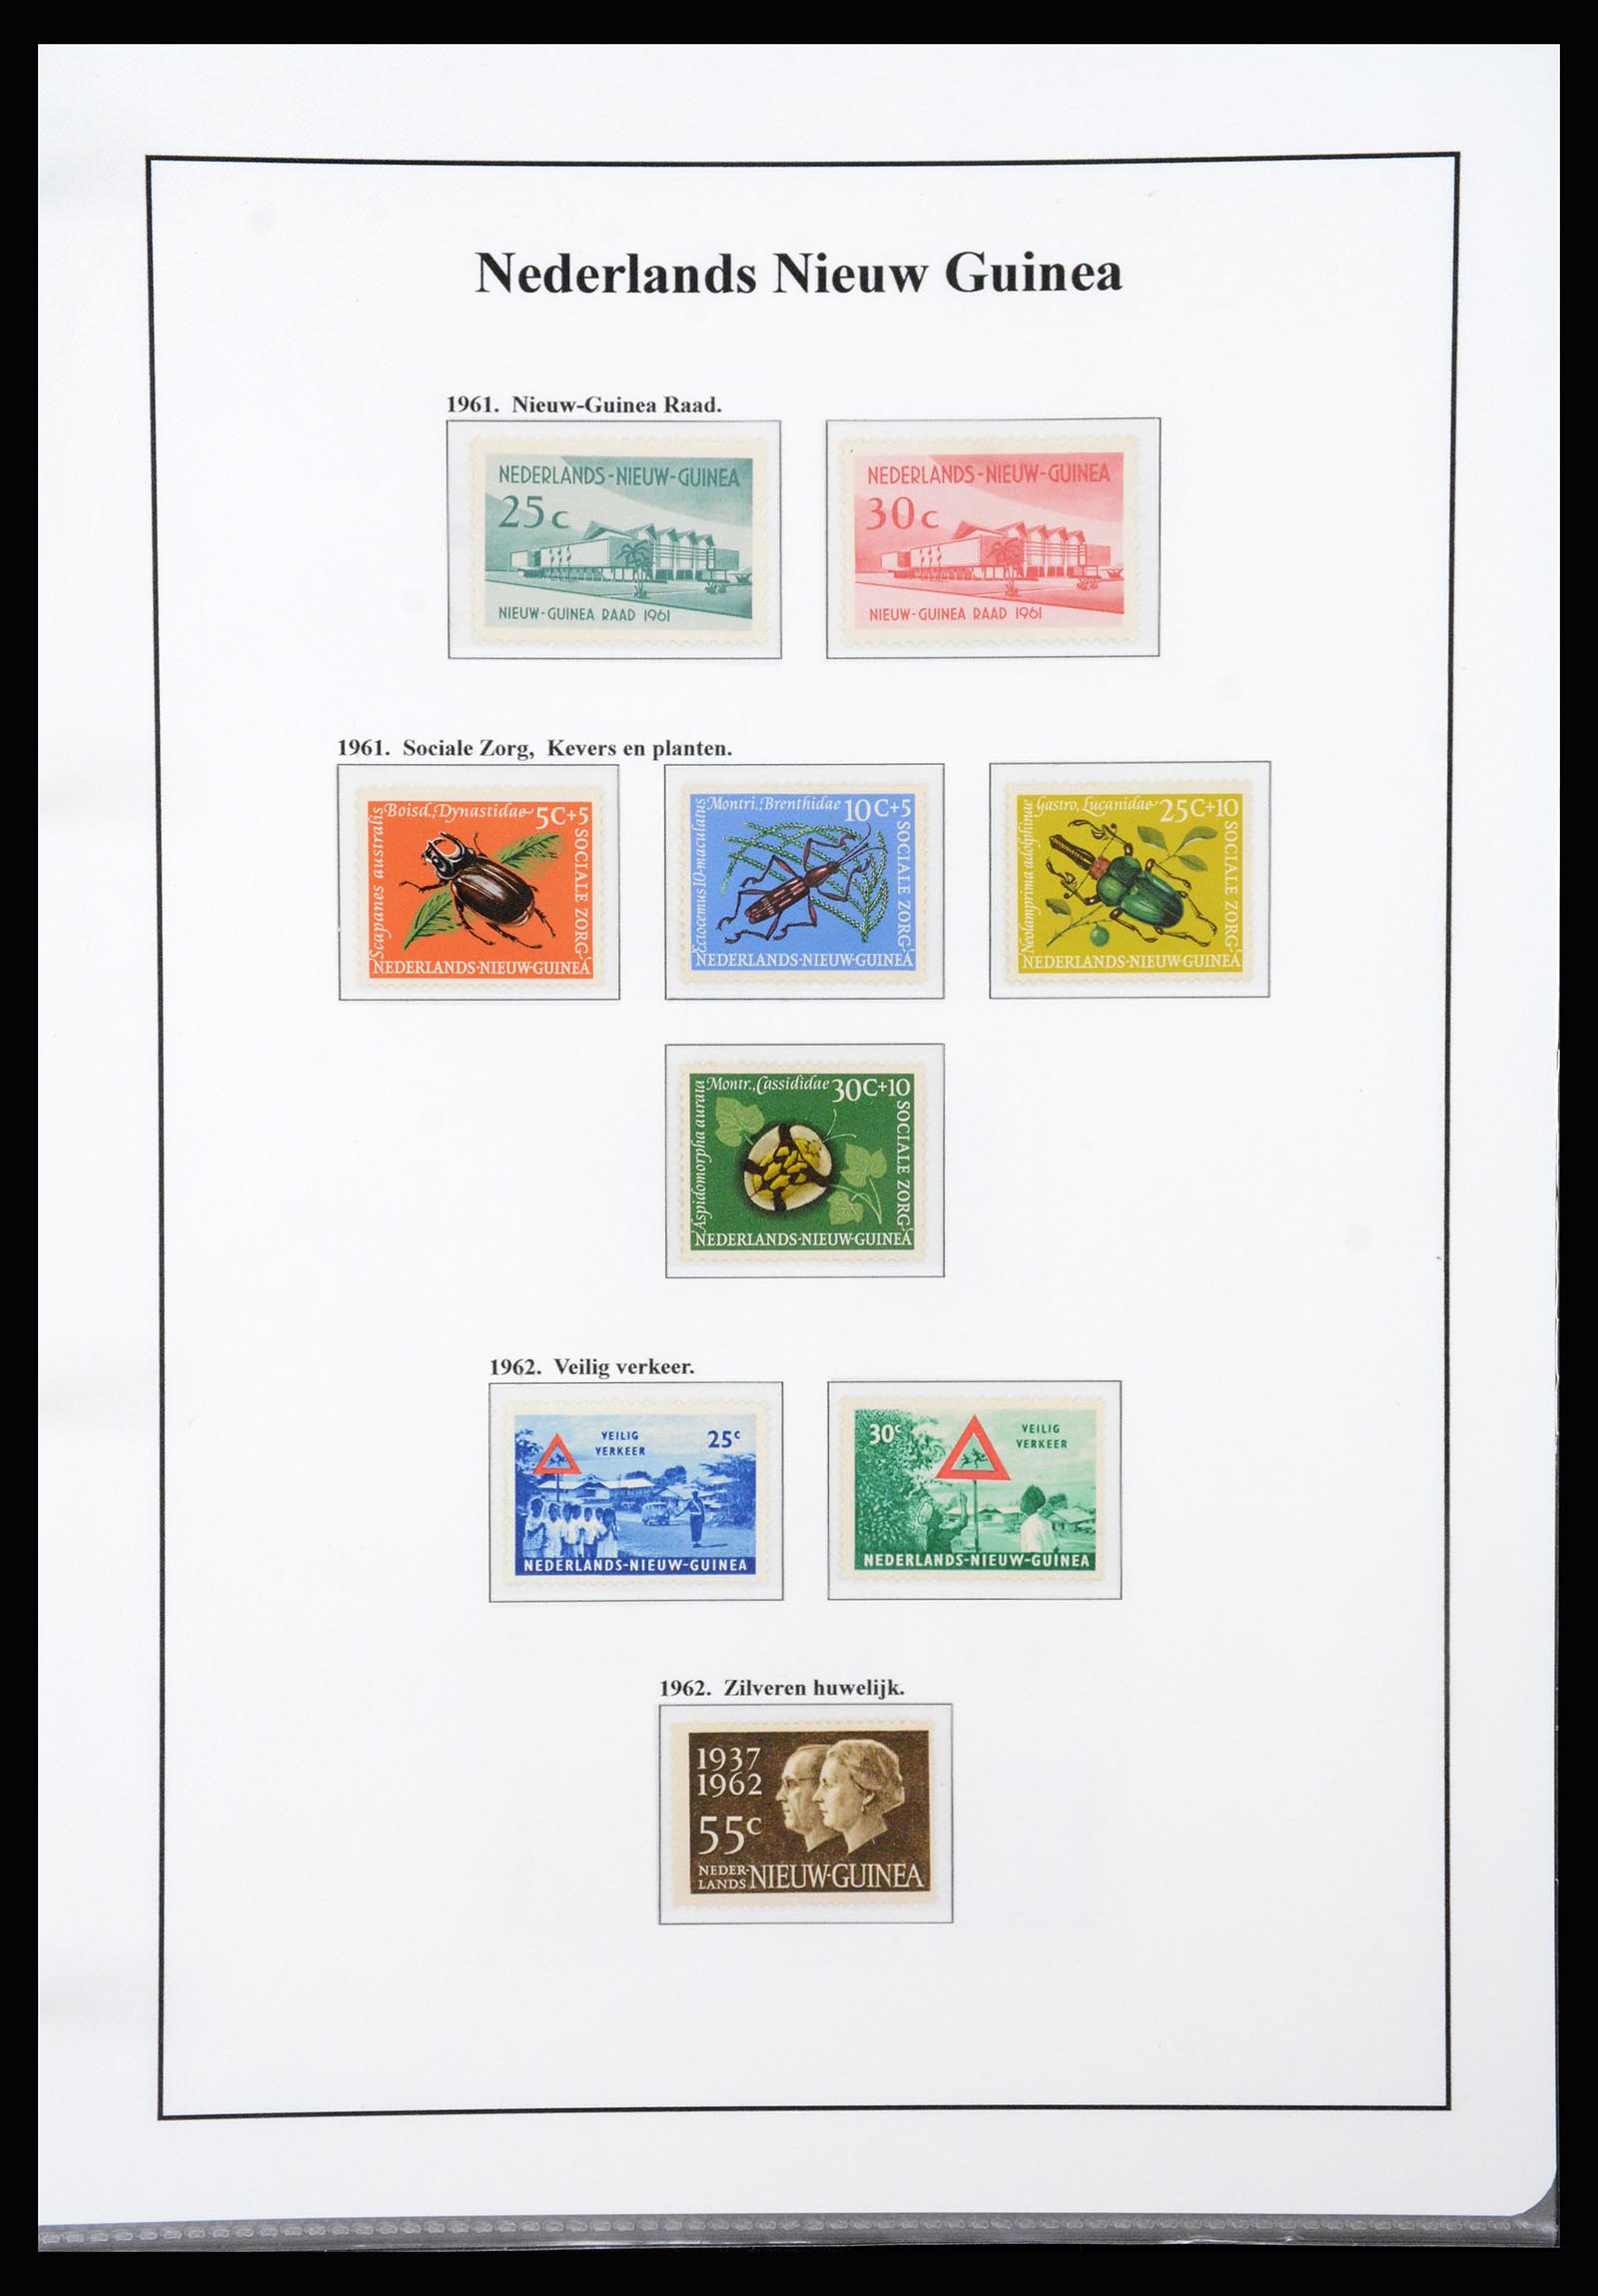 37247 043 - Stamp collection 37247 Dutch east Indies 1864-1949.